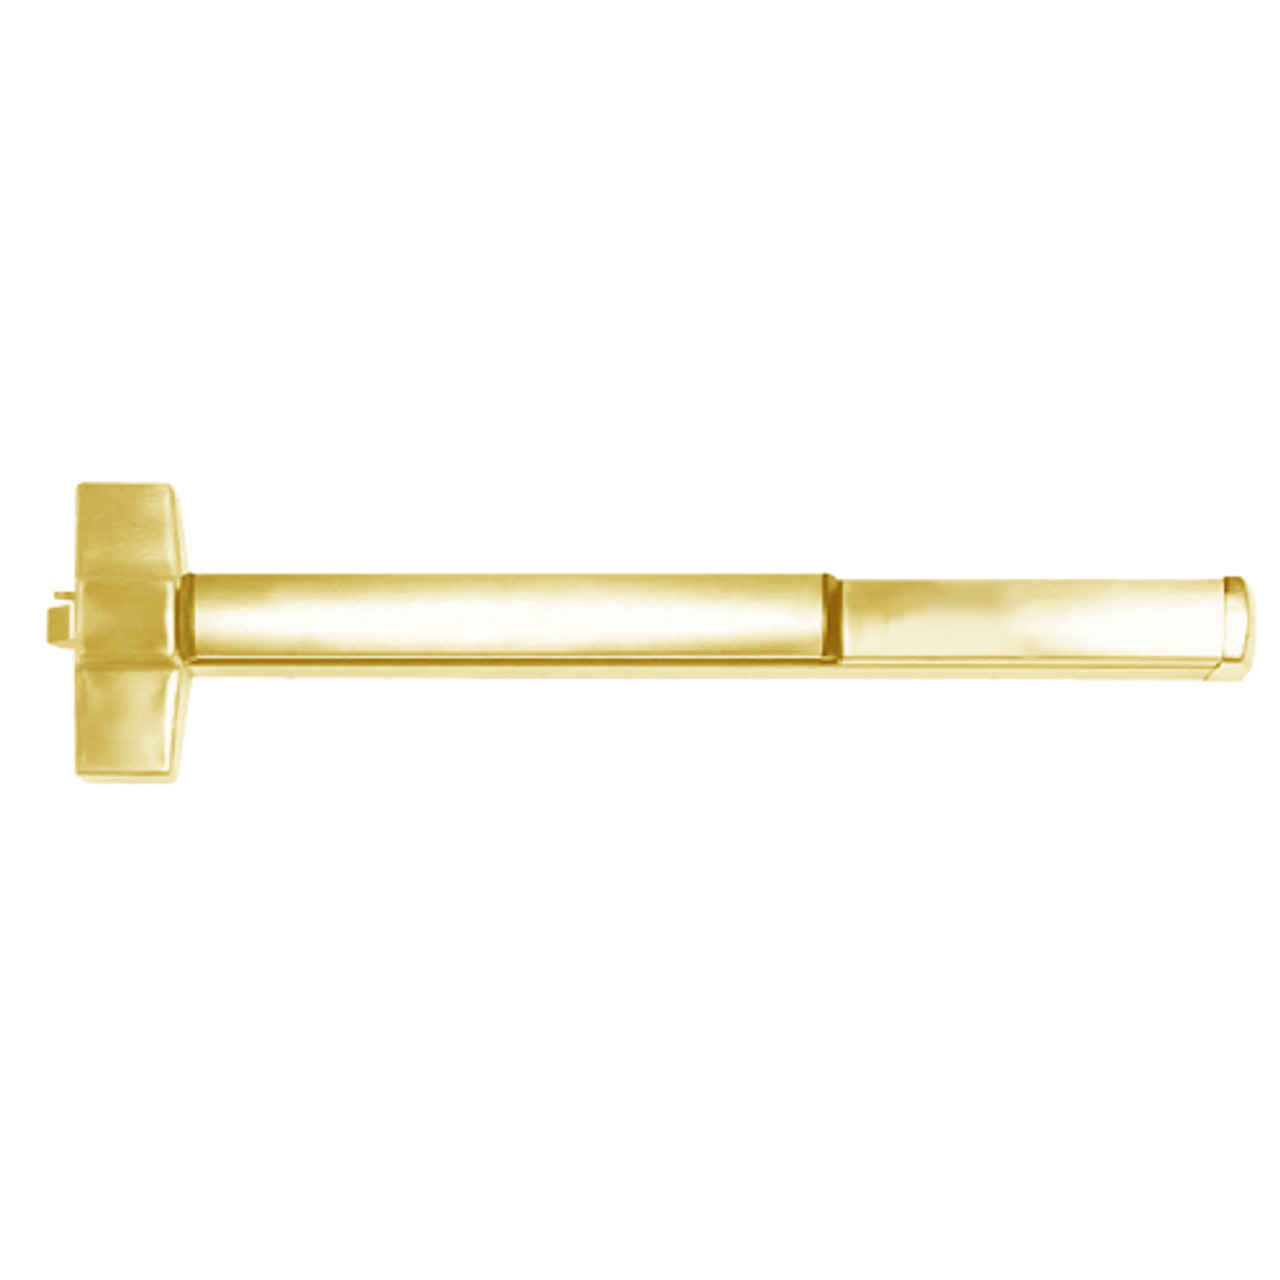 ED5200A-605-M92 Corbin ED5200 Series Fire Rated Rim Exit Device with Touchbar Monitoring in Bright Brass Finish